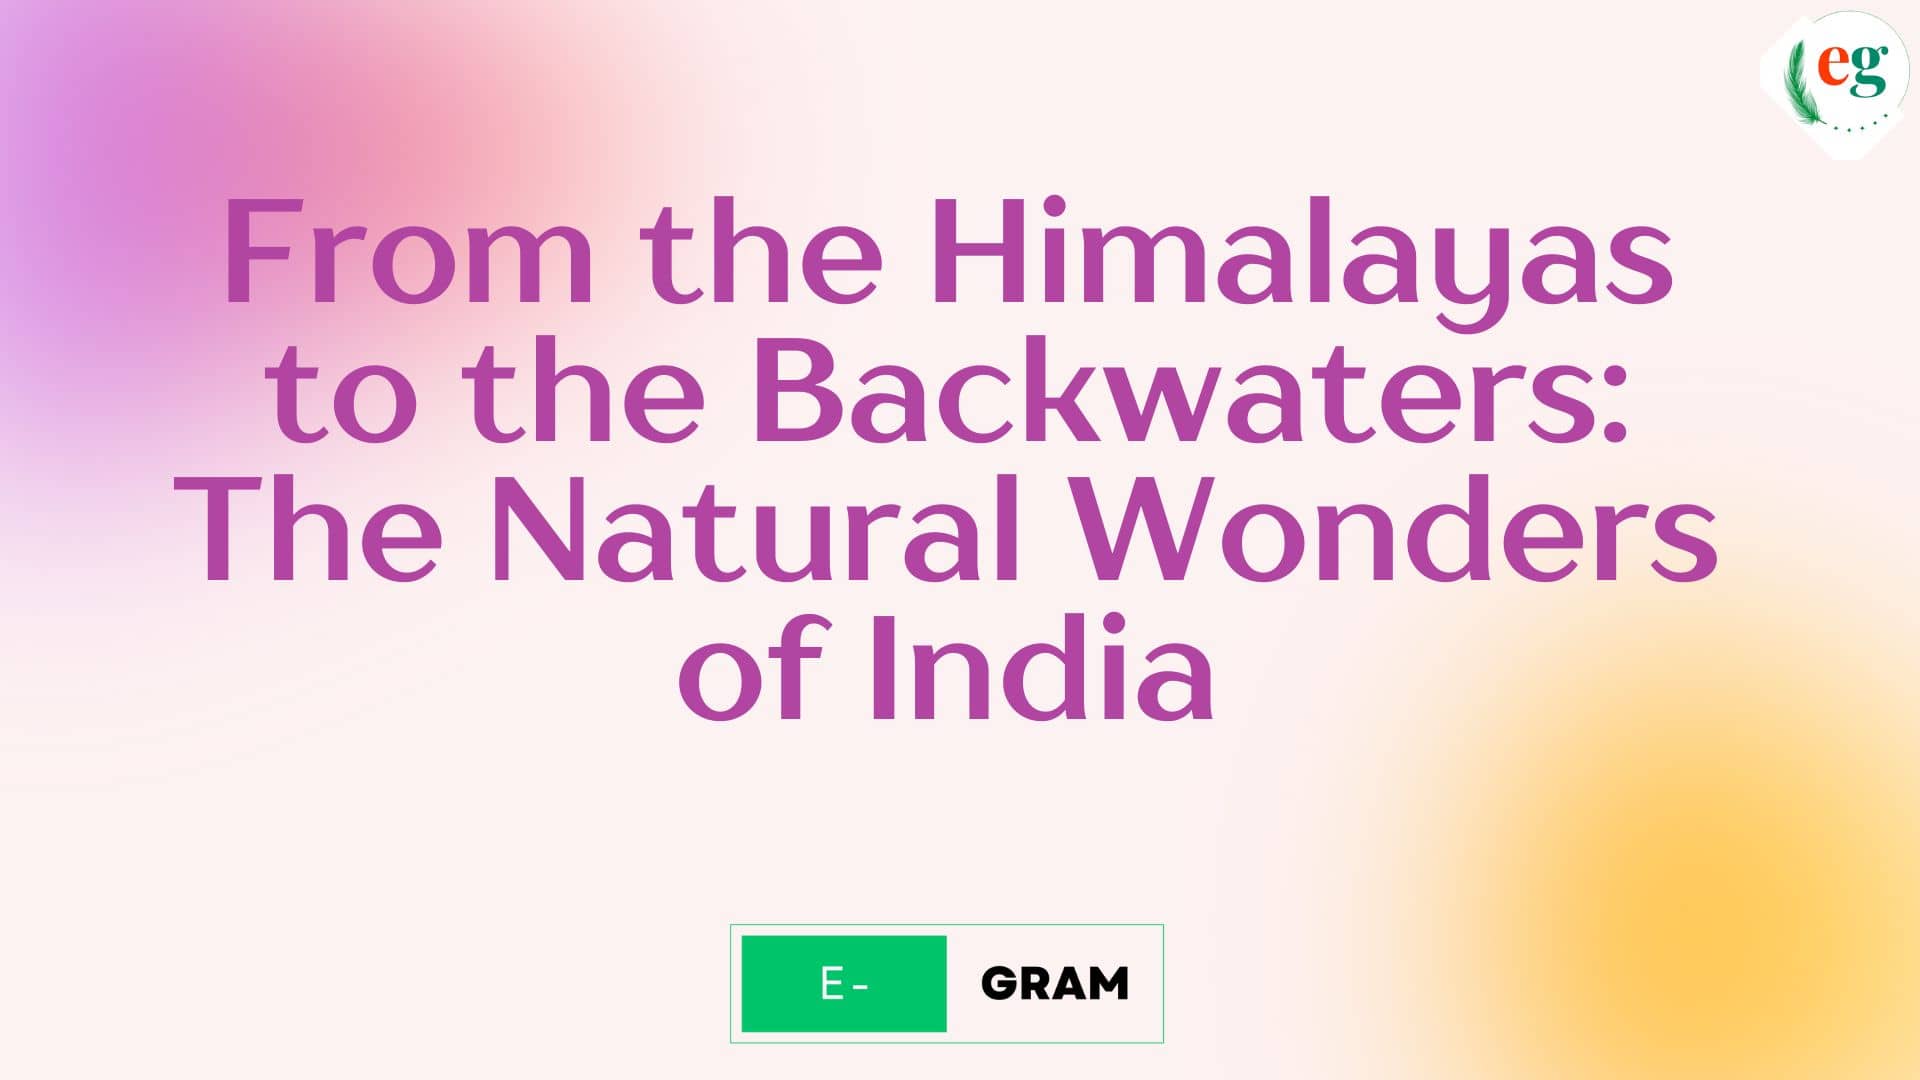 From the Himalayas to the Backwaters: The Natural Wonders of India